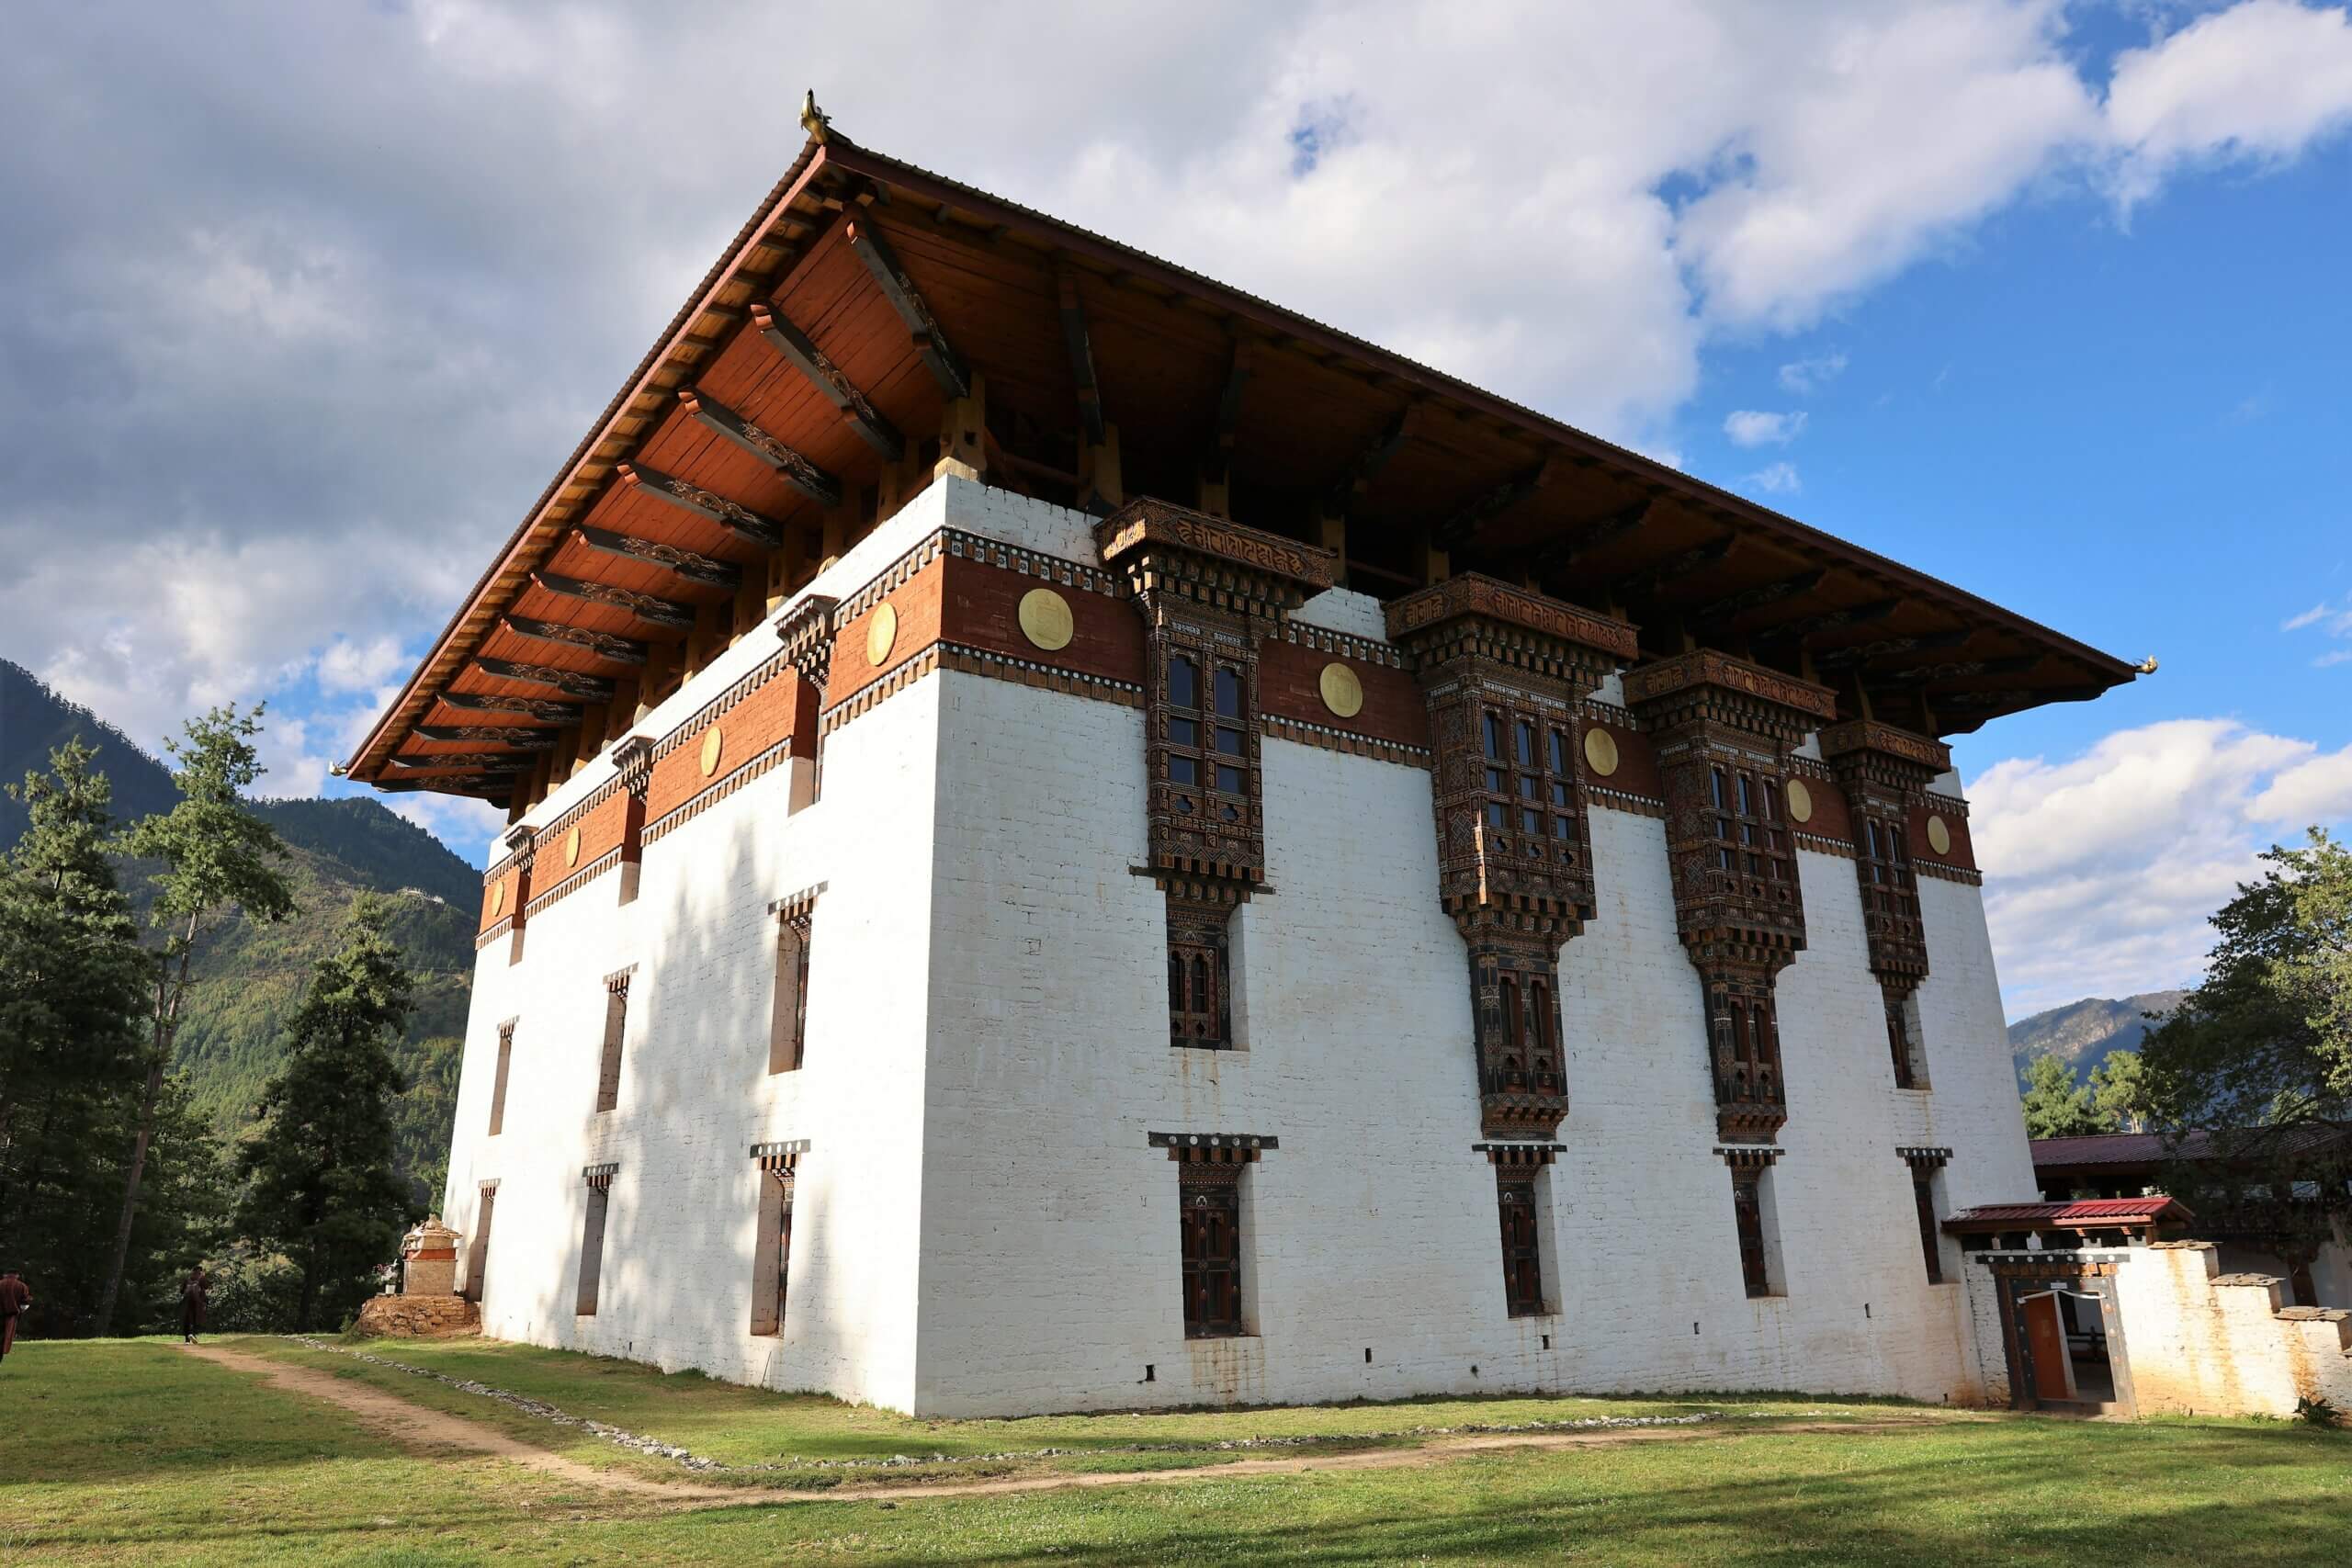 Fully renovated over a period of 5 years, the Druk Wangditse Lhakhang (temple) was reopened in 2020.